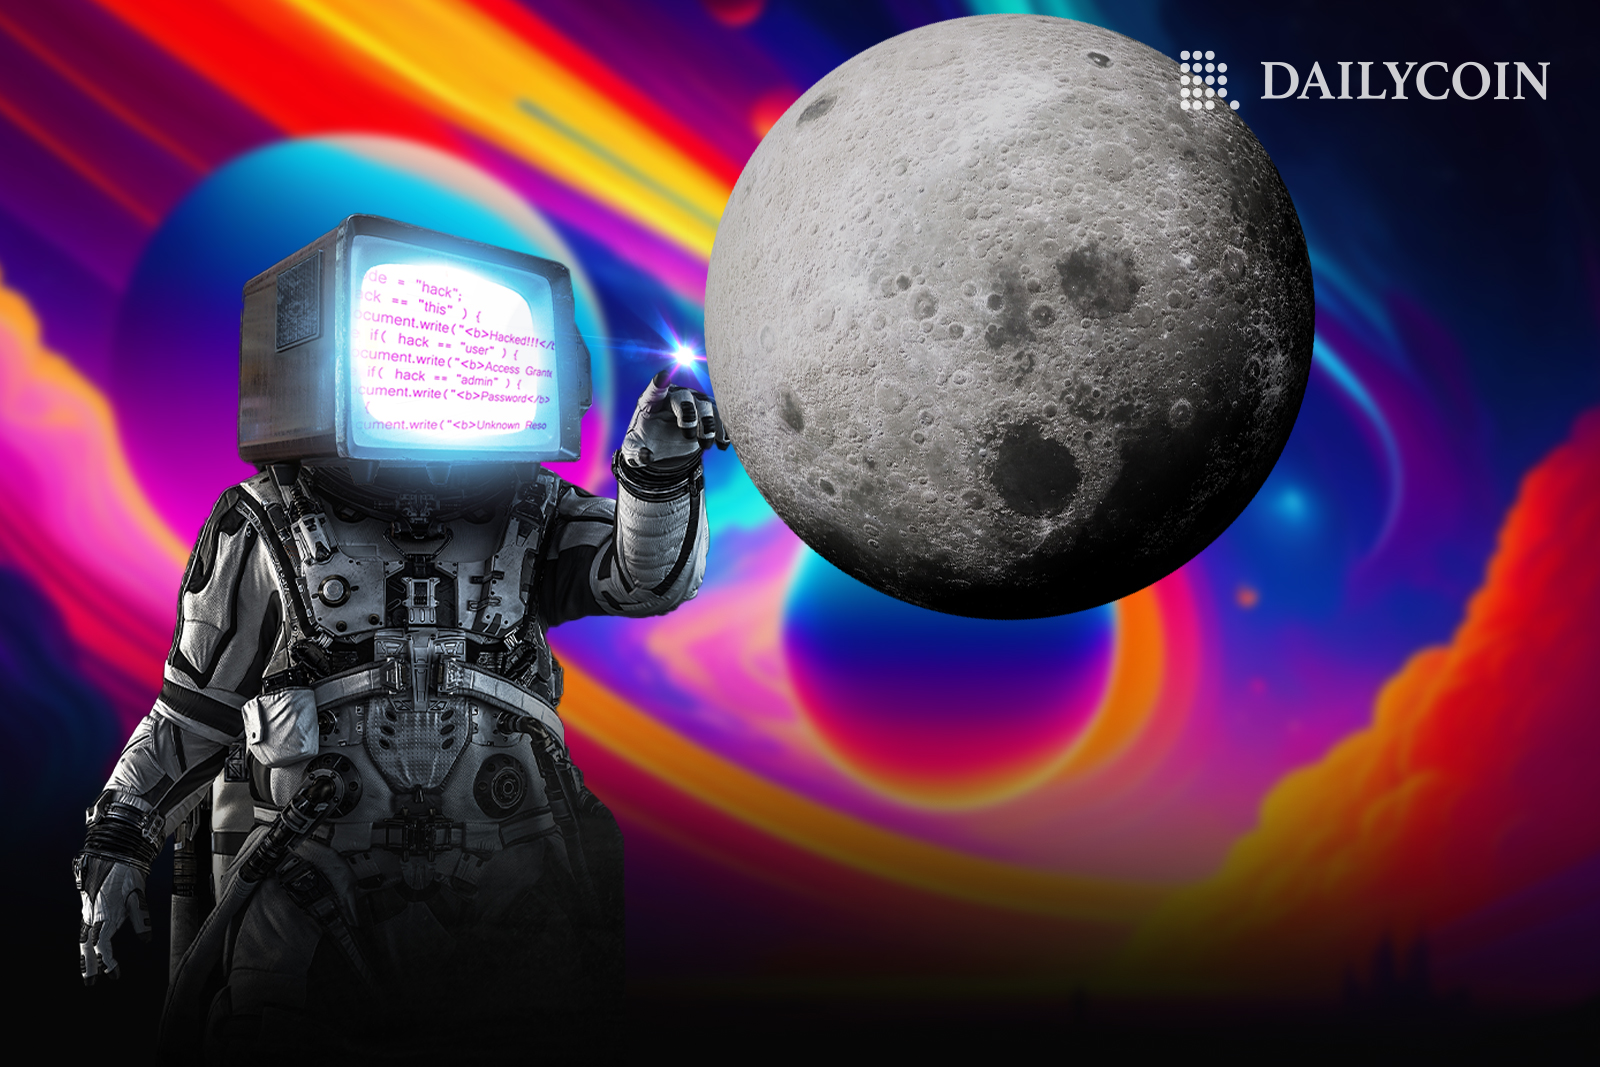 A robot with a TV instead of a head touches the moon